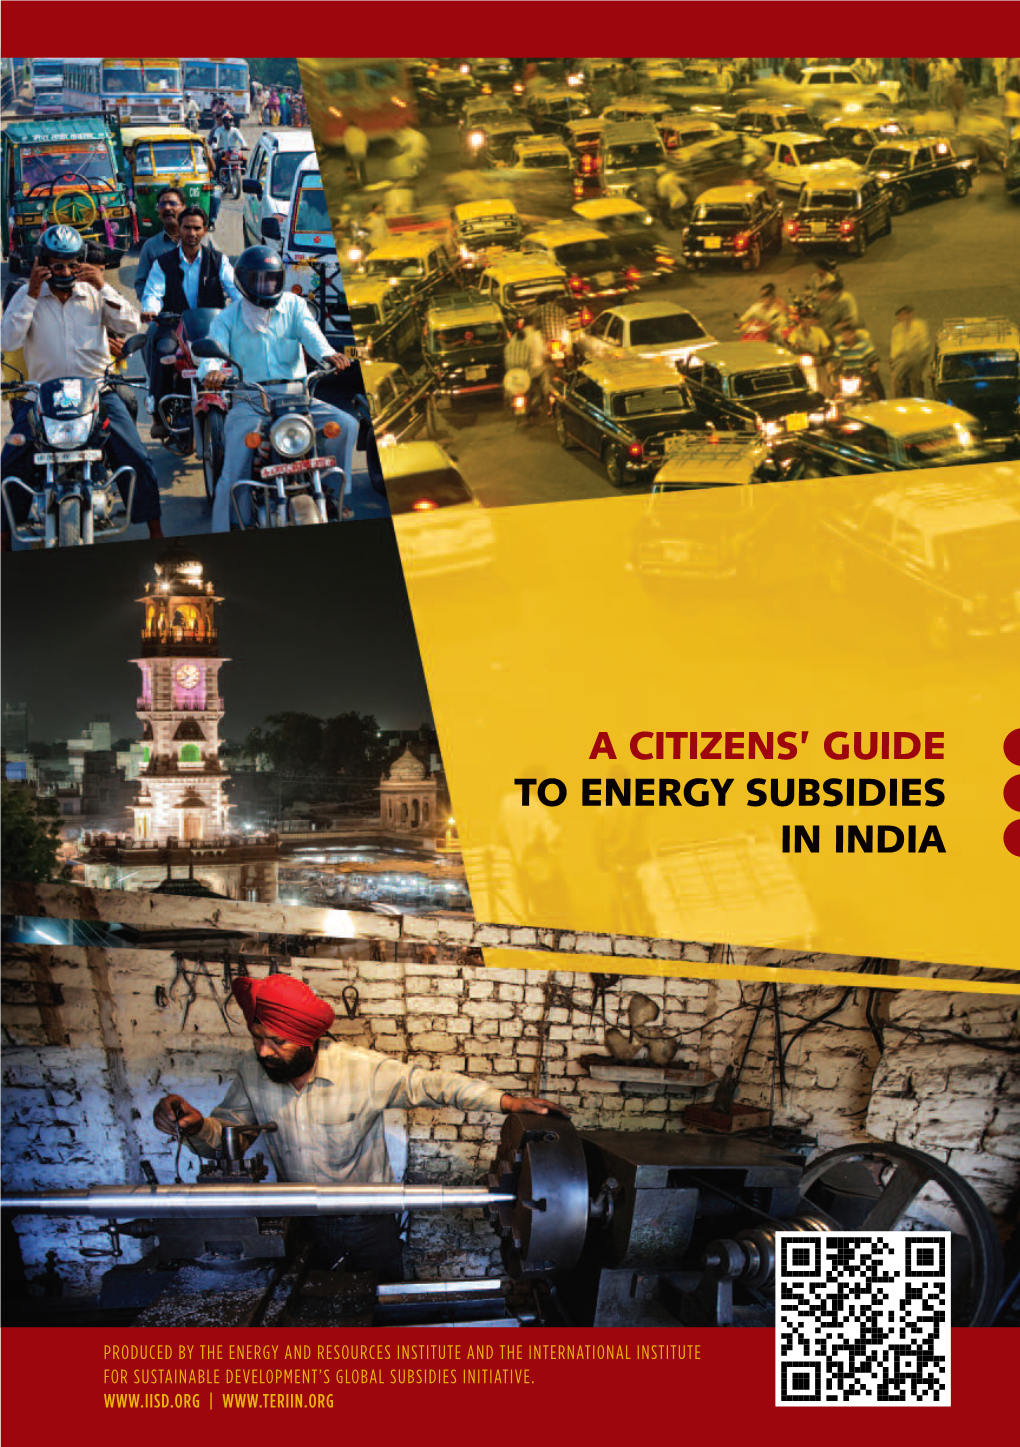 A Citizens' Guide to Energy Subsidies in India